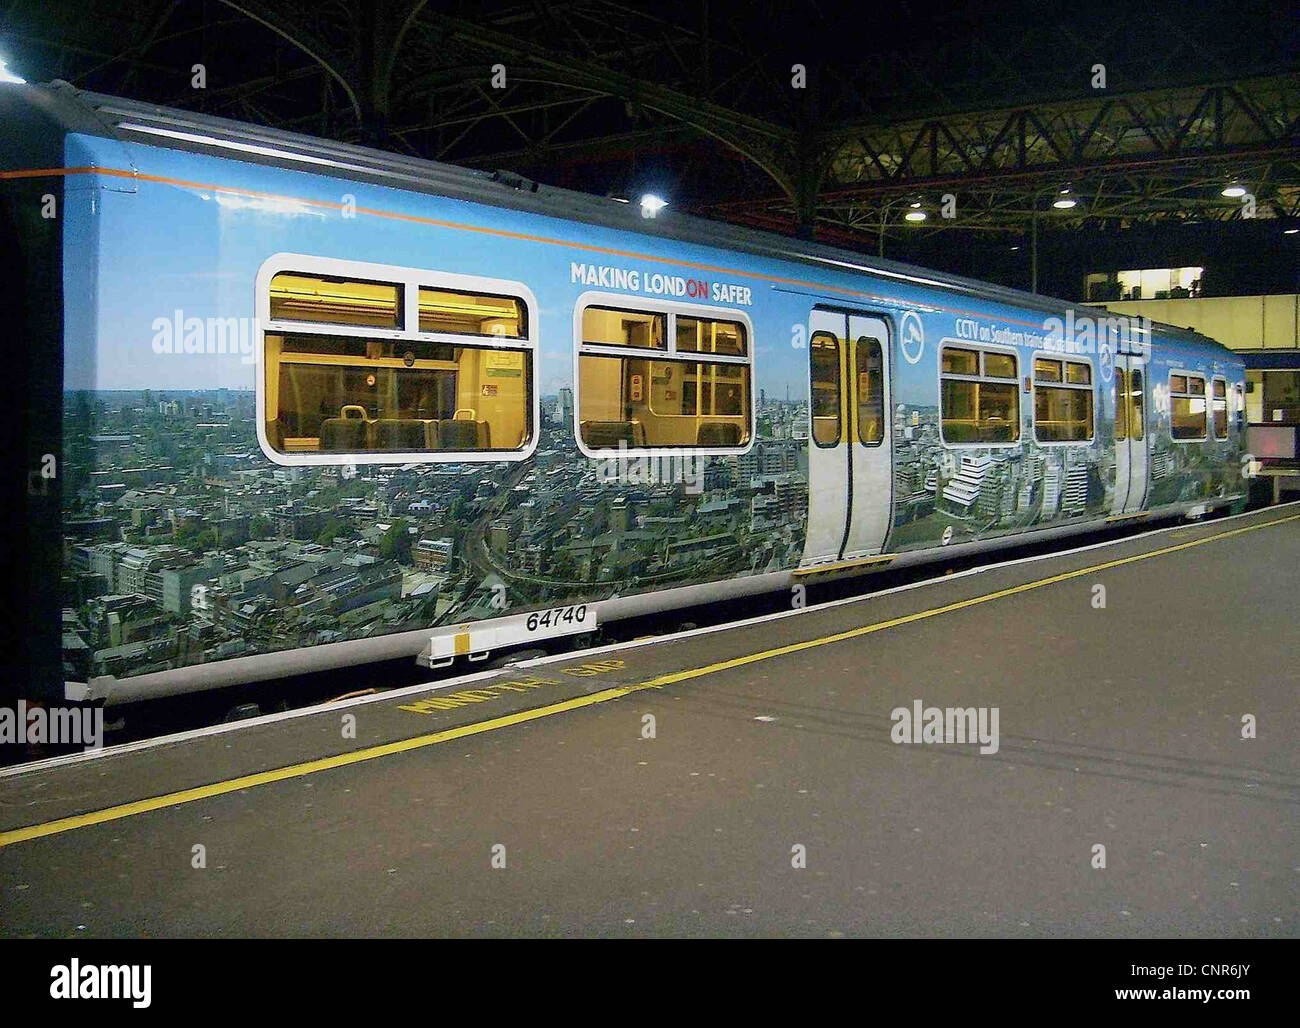 Southern/TfL CCTV advertising livery as shown on the DMSO vehicle from Southern Metro Class 456 EMU No. 456006} Stock Photo